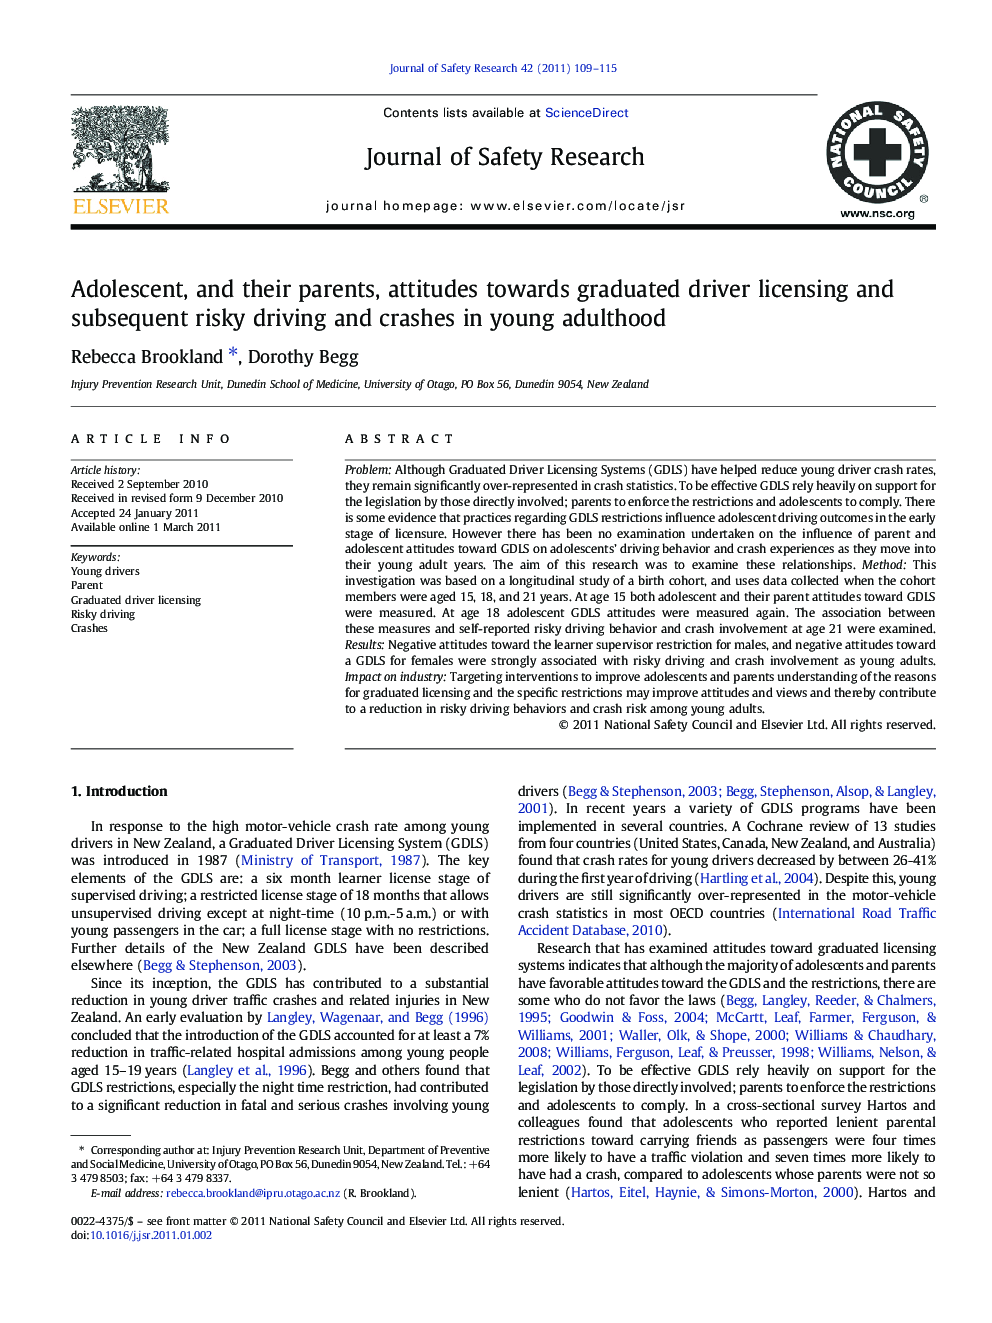 Adolescent, and their parents, attitudes towards graduated driver licensing and subsequent risky driving and crashes in young adulthood